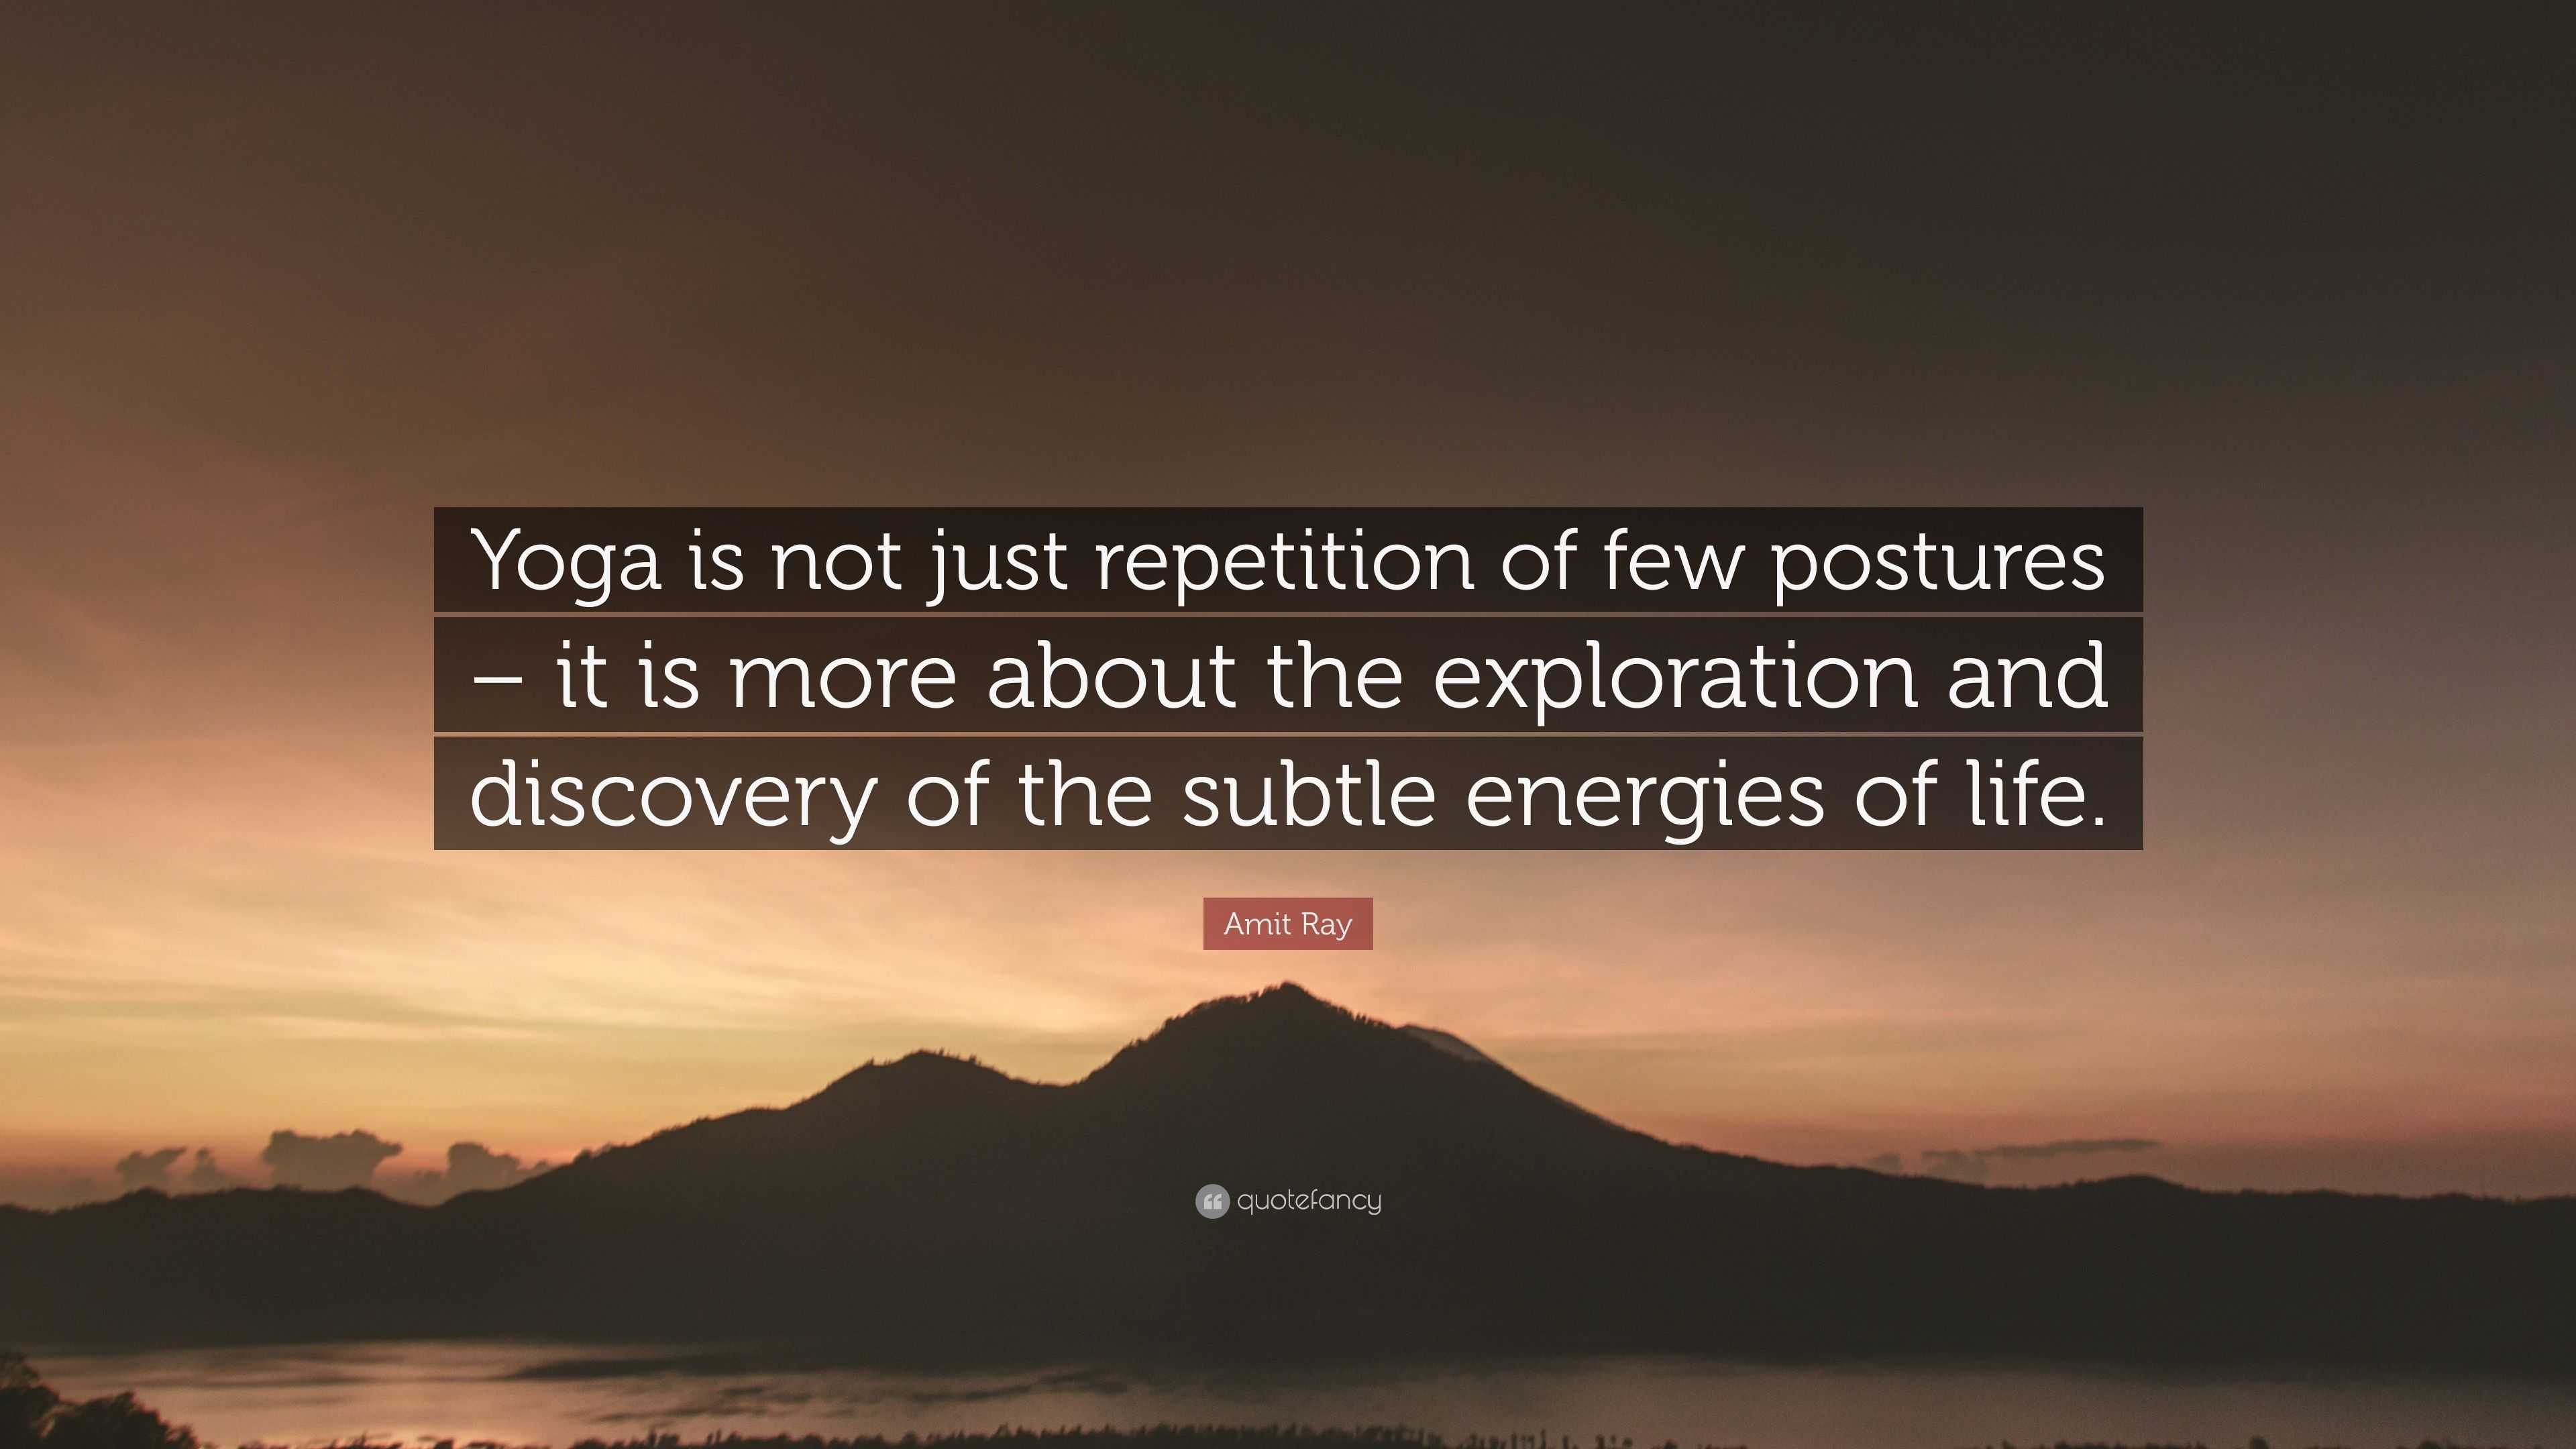 Yoga journal - ''yoga is not just repetition of few postures-it is